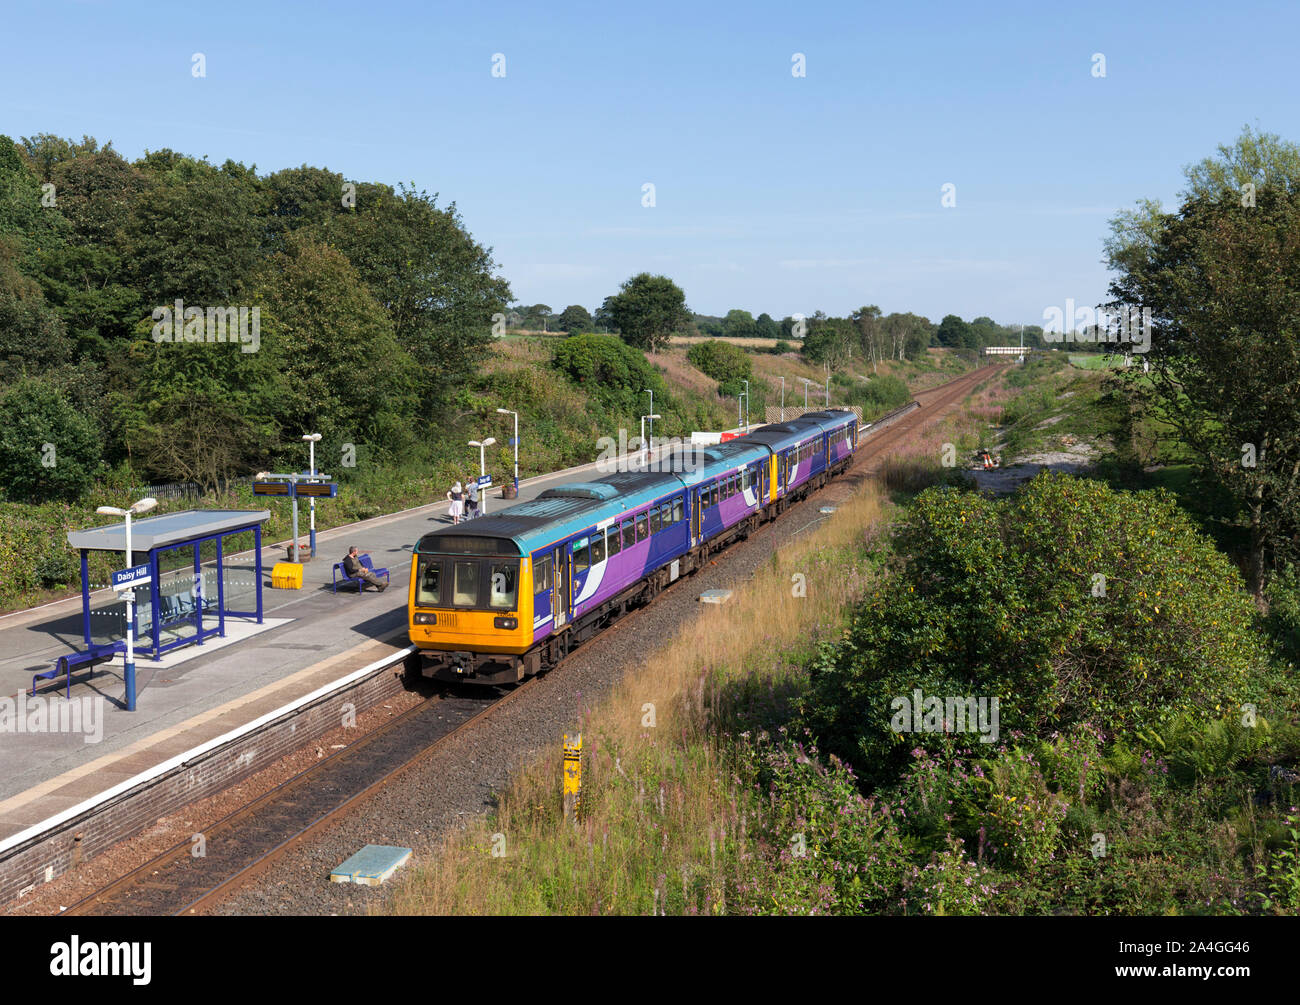 2 Arriva Northern rail class 142 pacer trains at Daisy Hill railway station, Lancashire Stock Photo